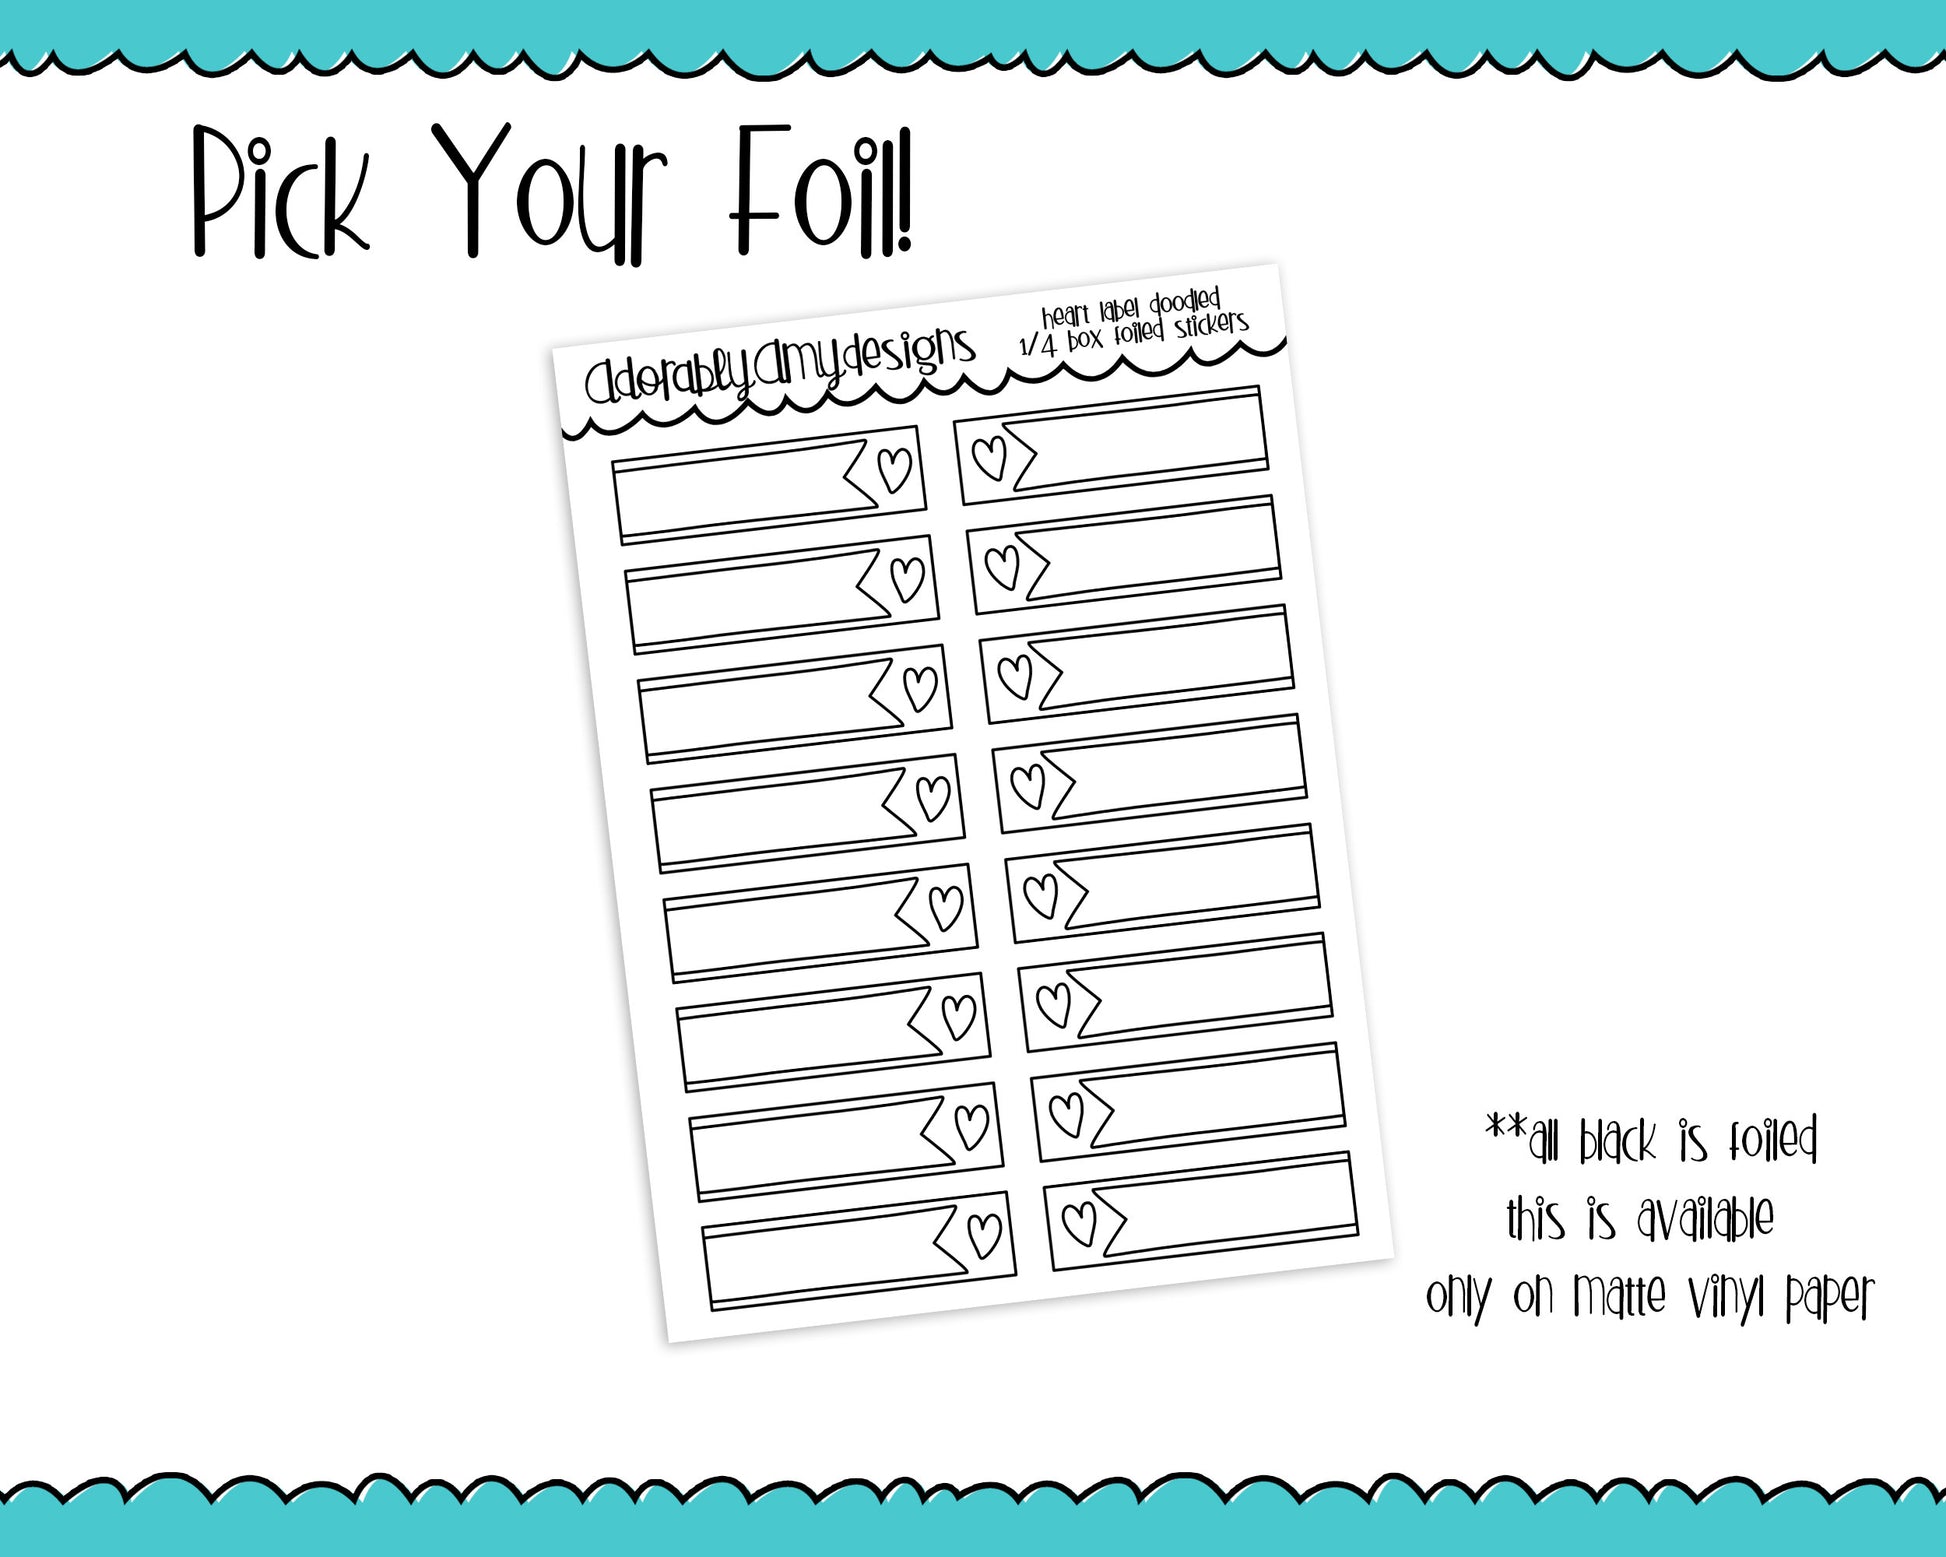 Foiled Doodled Heart Labels Quarter Box Planner Stickers for any Planner or Insert - Adorably Amy Designs